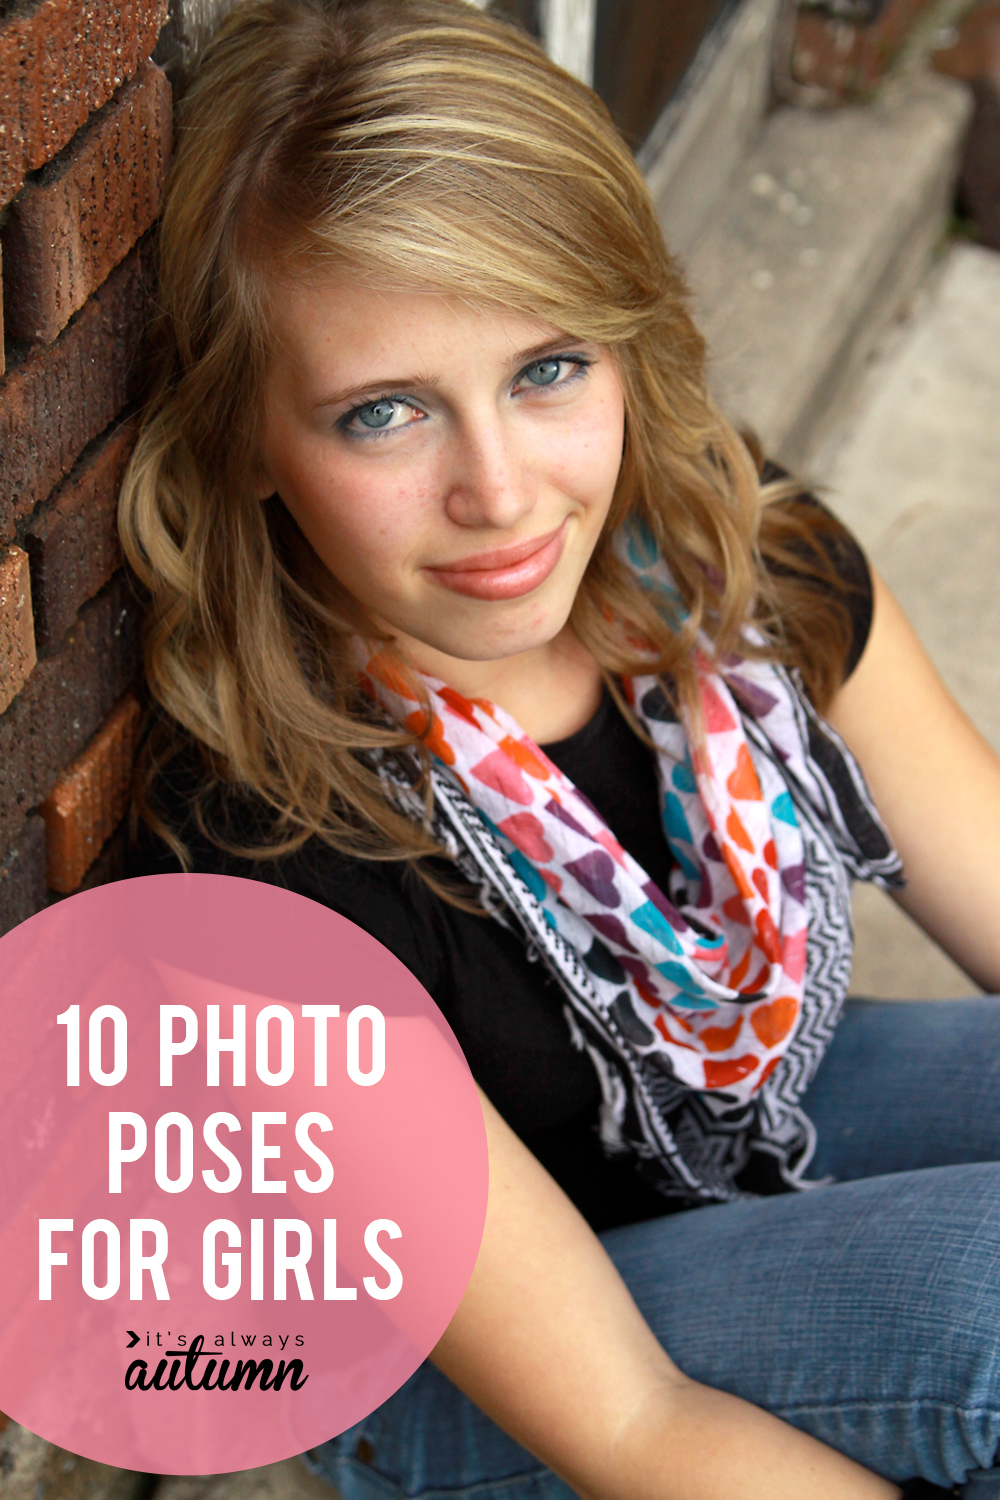 Photoshoot Poses For Girls: Top 11 Tips To Pose Like a Top Model!